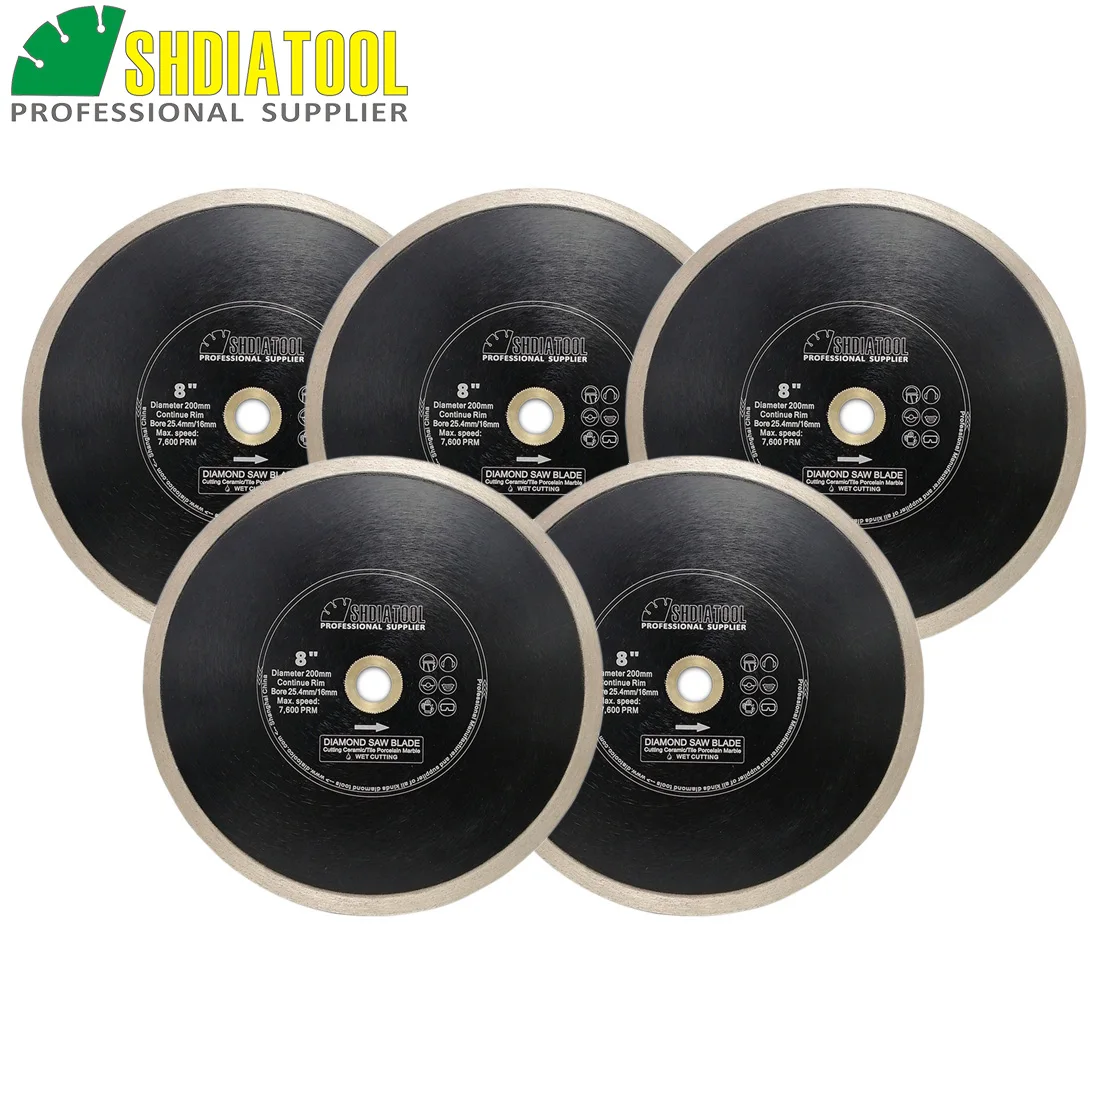 

SHDIATOOL 5pcs/set Dia 8"/200mm Hot-pressed Continue rim Diamond Cutting Disc Wet for Porcelain Tile Marble 8inch Saw Blades